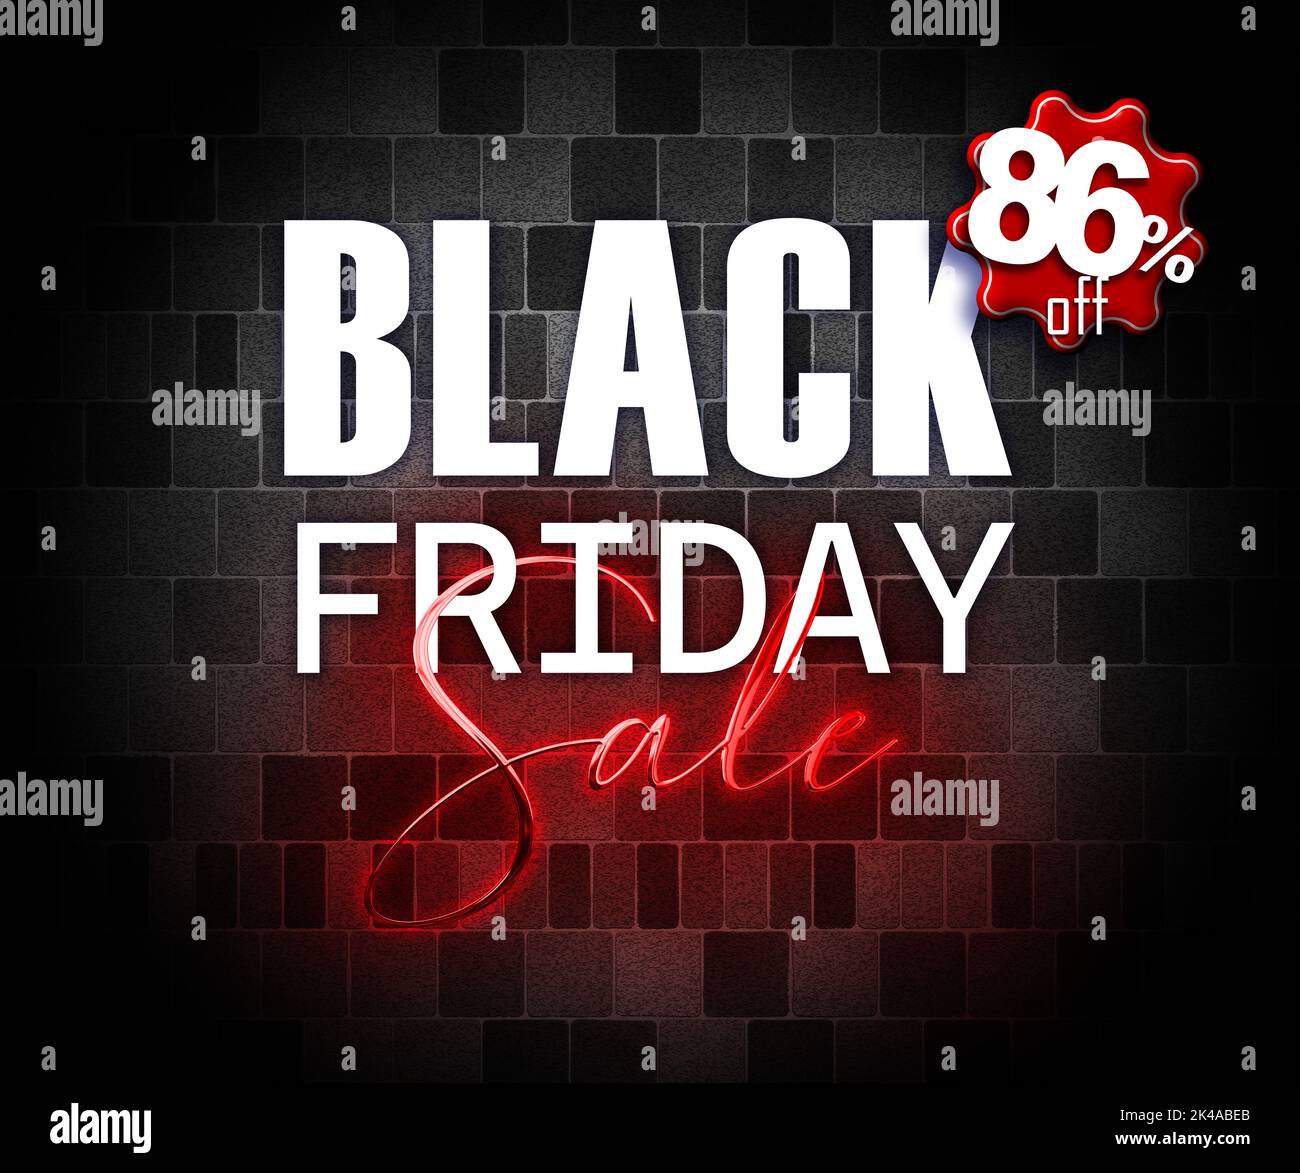 illustration with 3d elements black friday promotion banner 86 percent off sales increase Stock Photo